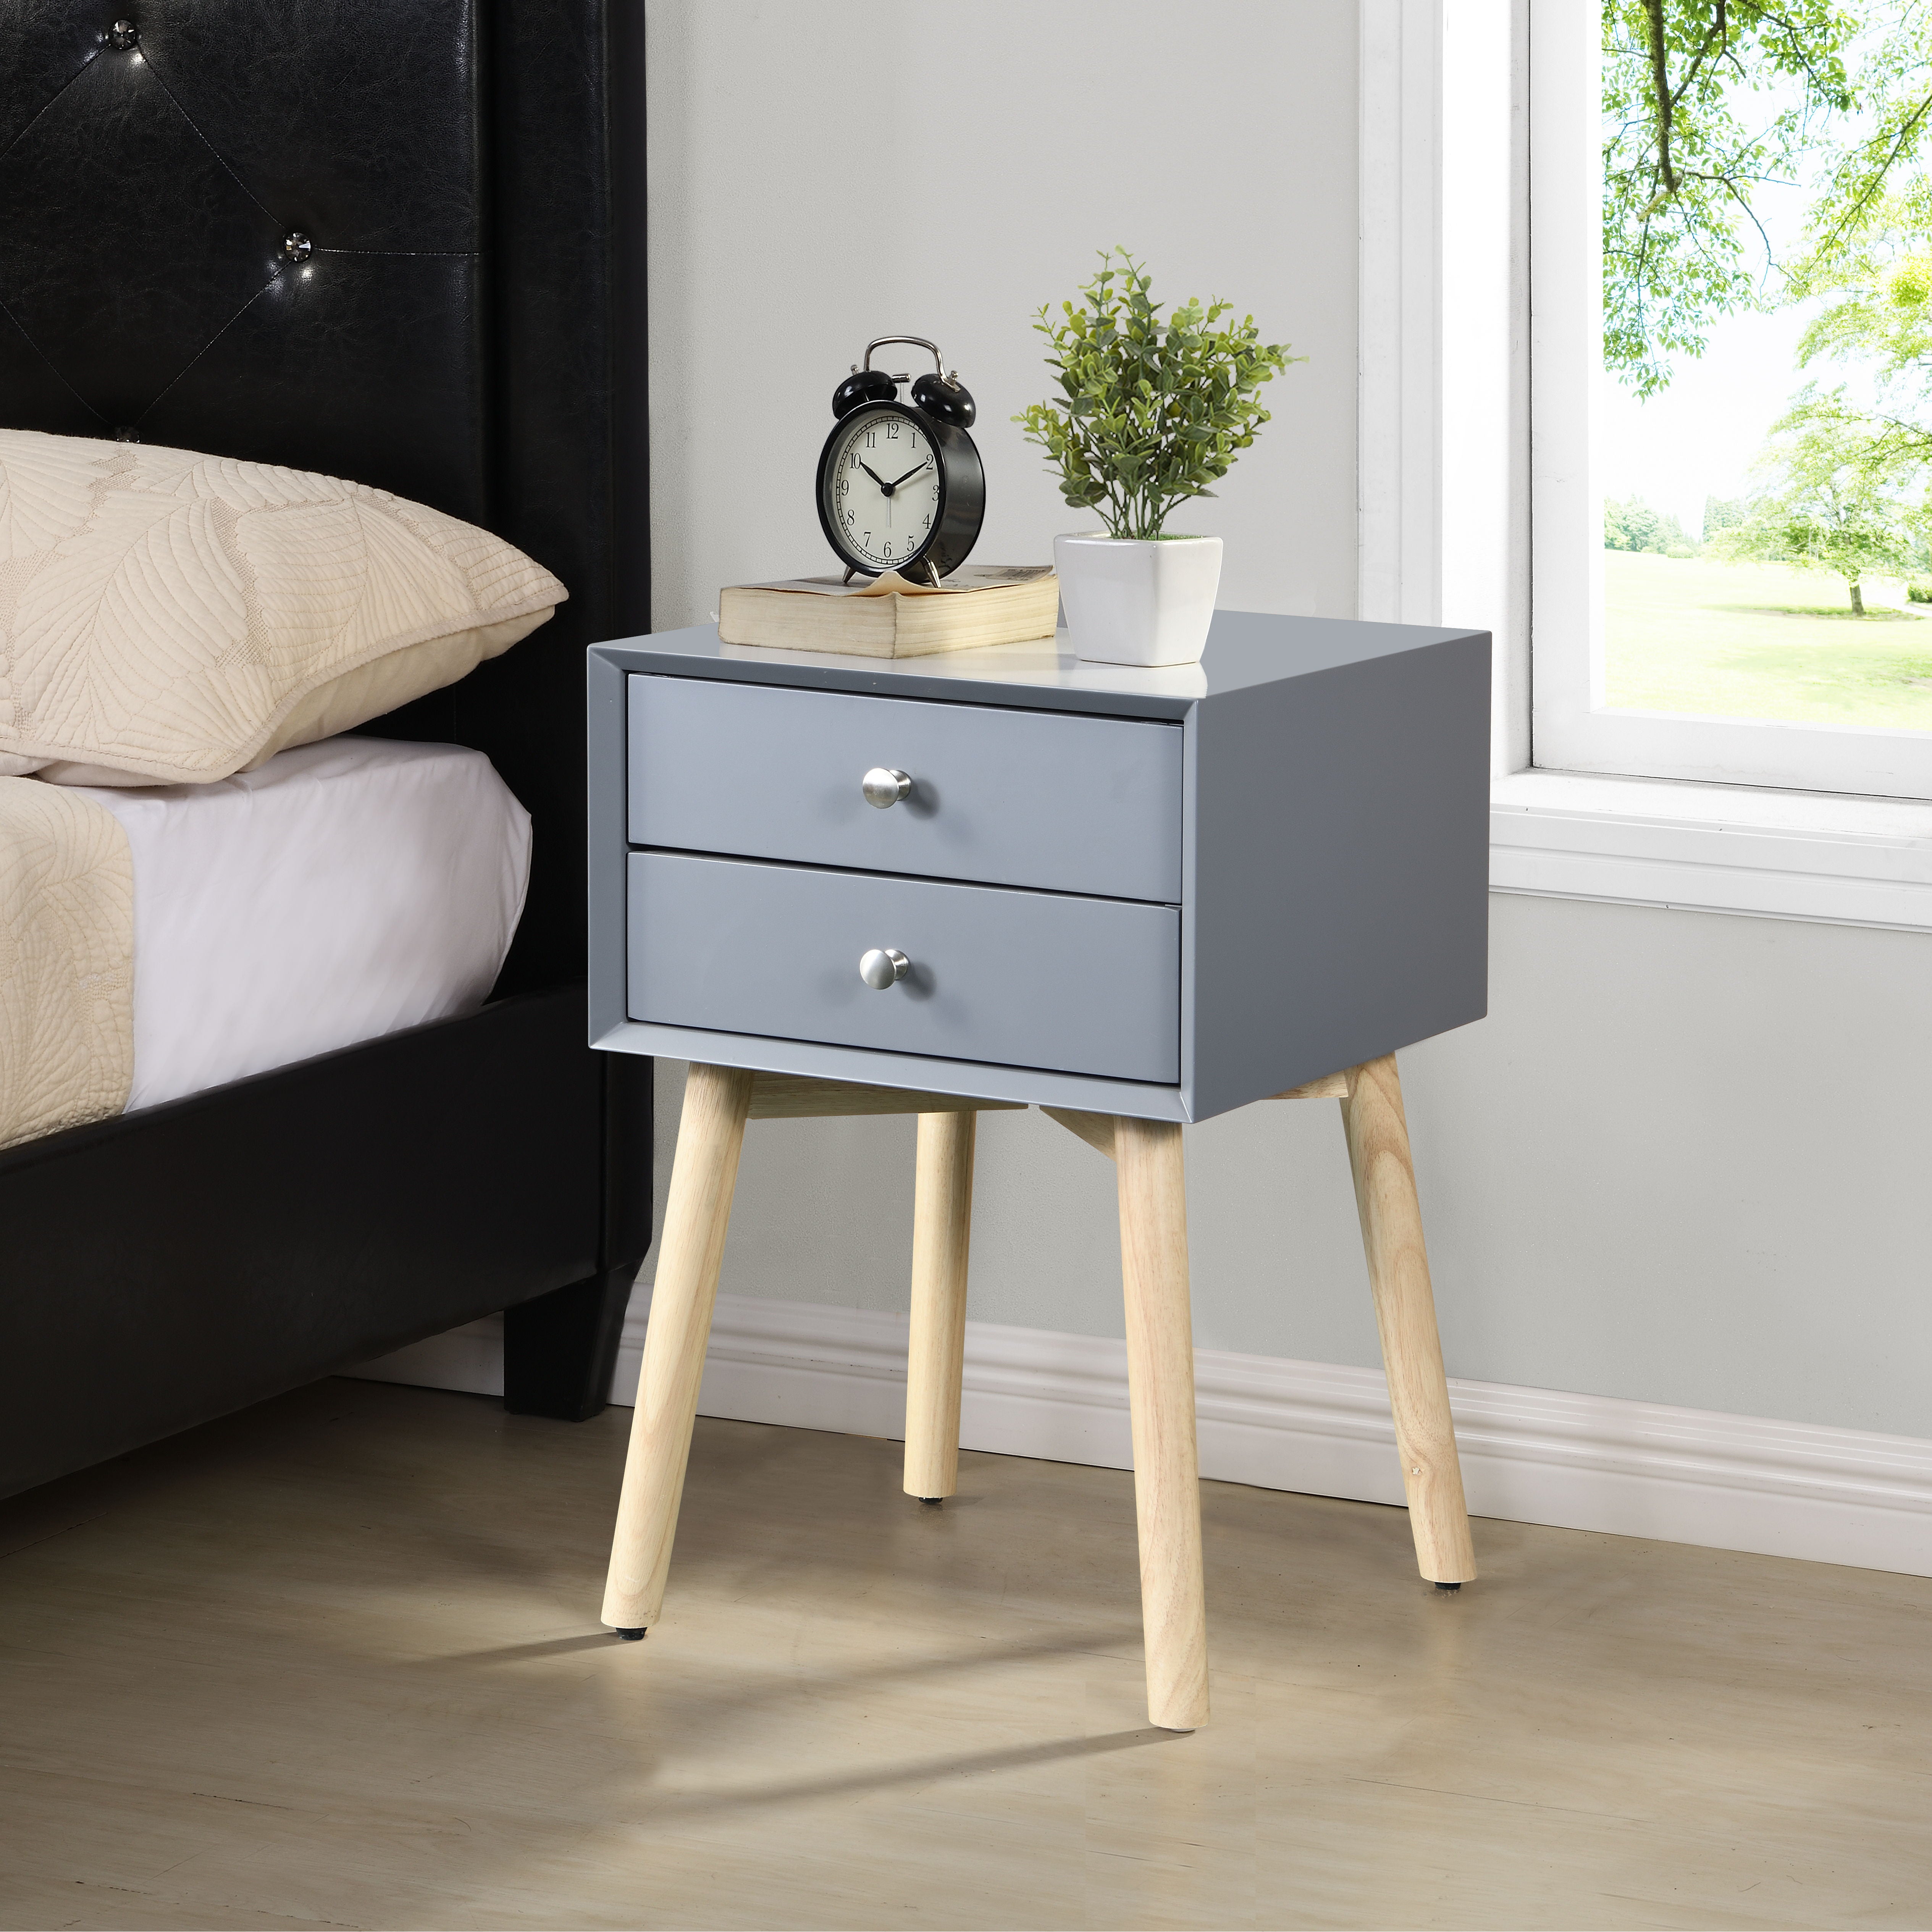 Zfztimber Side Table, Bedside Table With 2 Drawers And Rubber Wood Legs, Mid - Century Modern Storage Cabinet For Bedroom - Gray